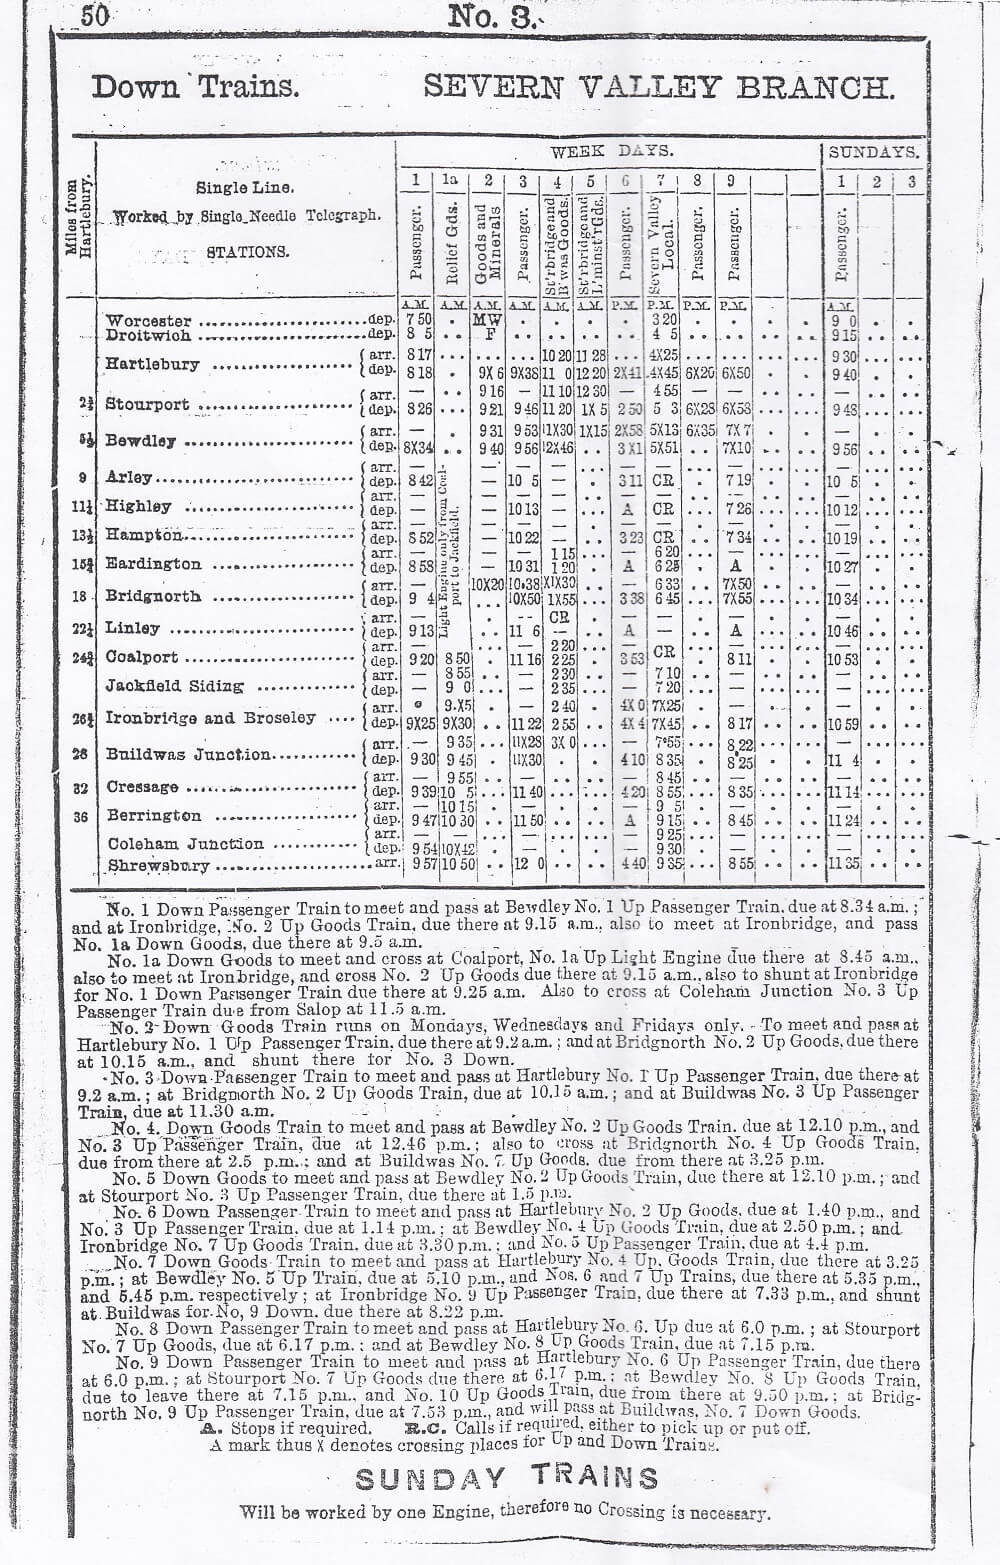 1876 timetable page 50.jpg